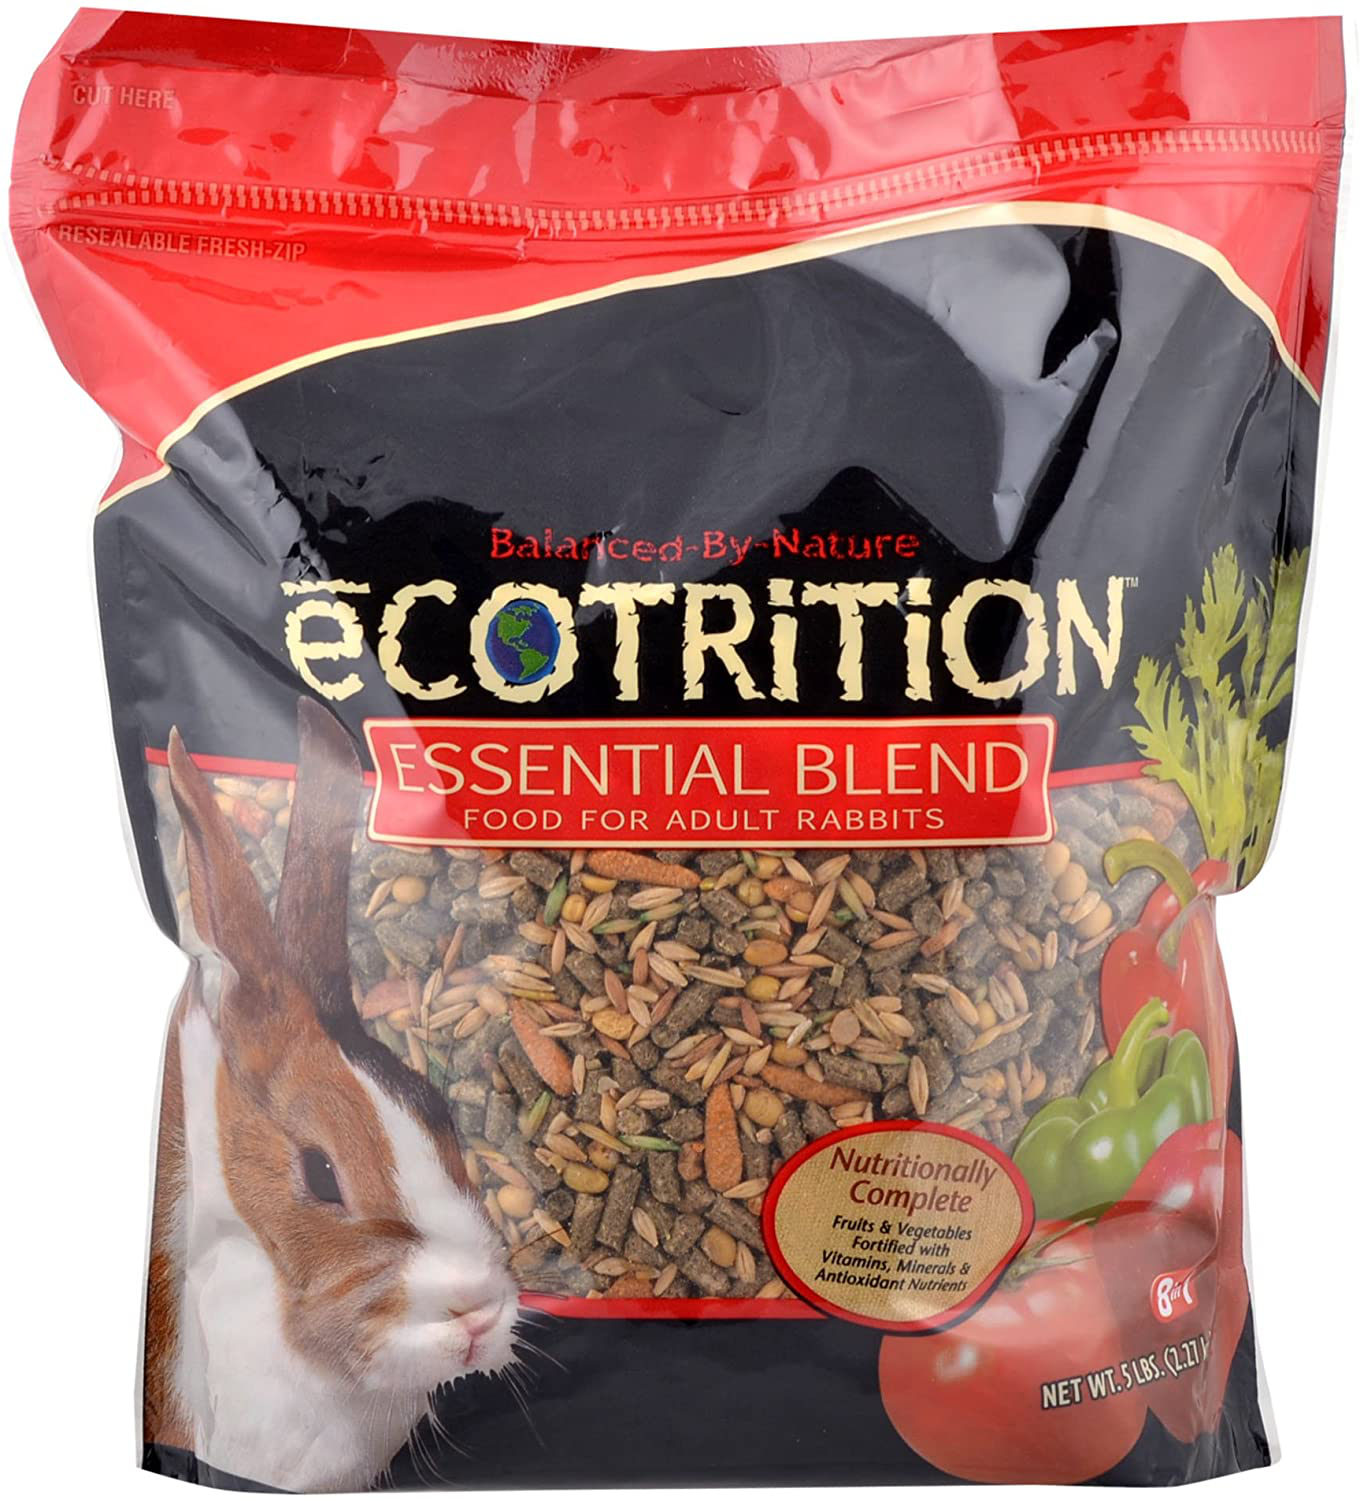 Ecotrition Essential Blend Food for Adult Rabbits, 5 Pounds, Resealable Bag